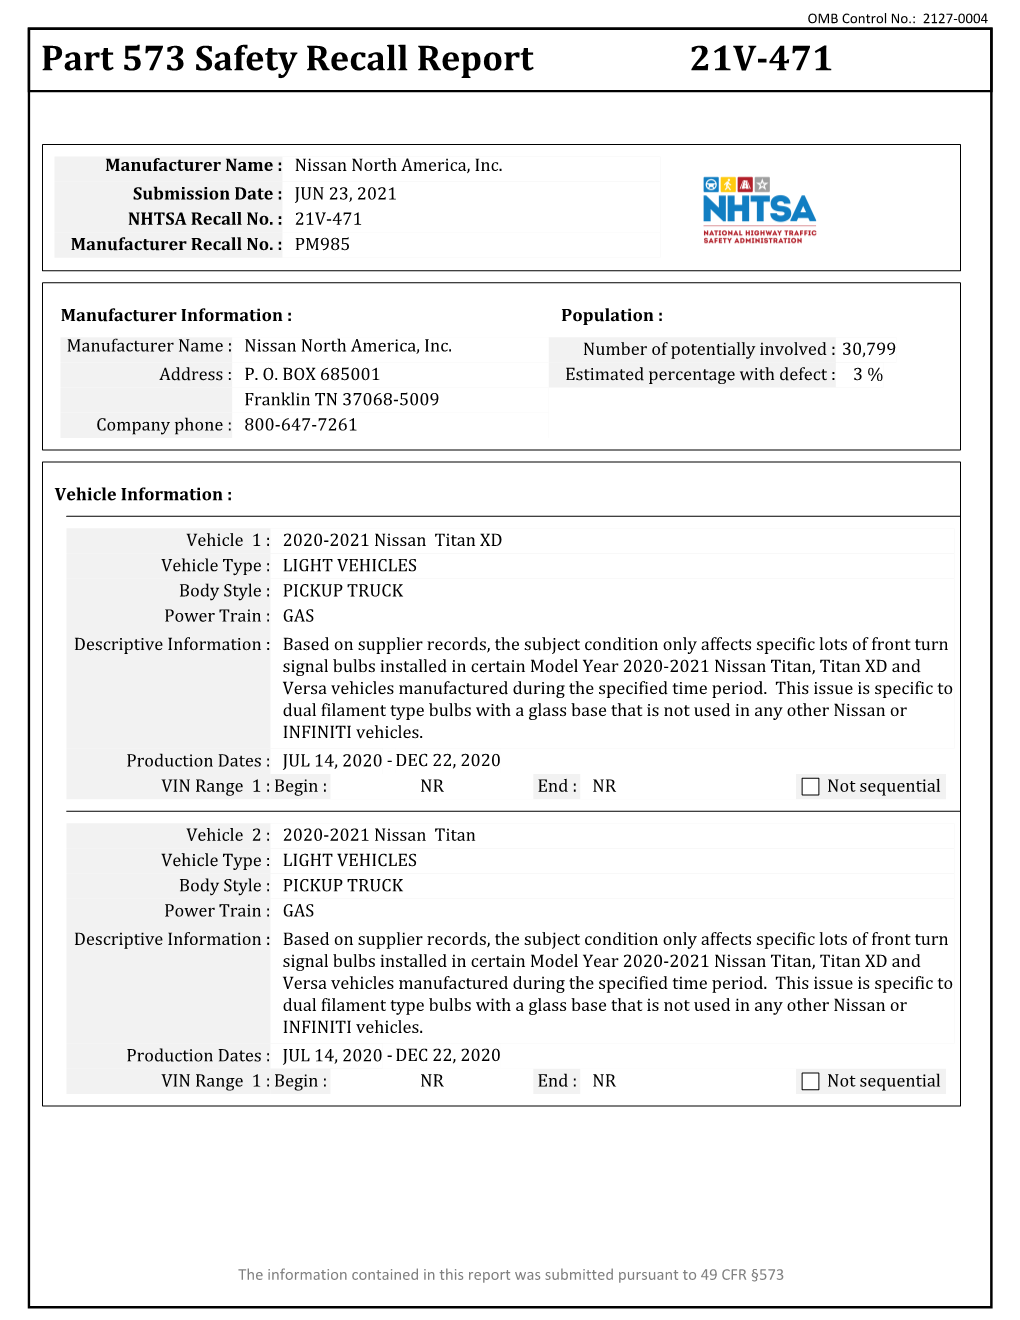 Part 573 Safety Recall Report 21V-471